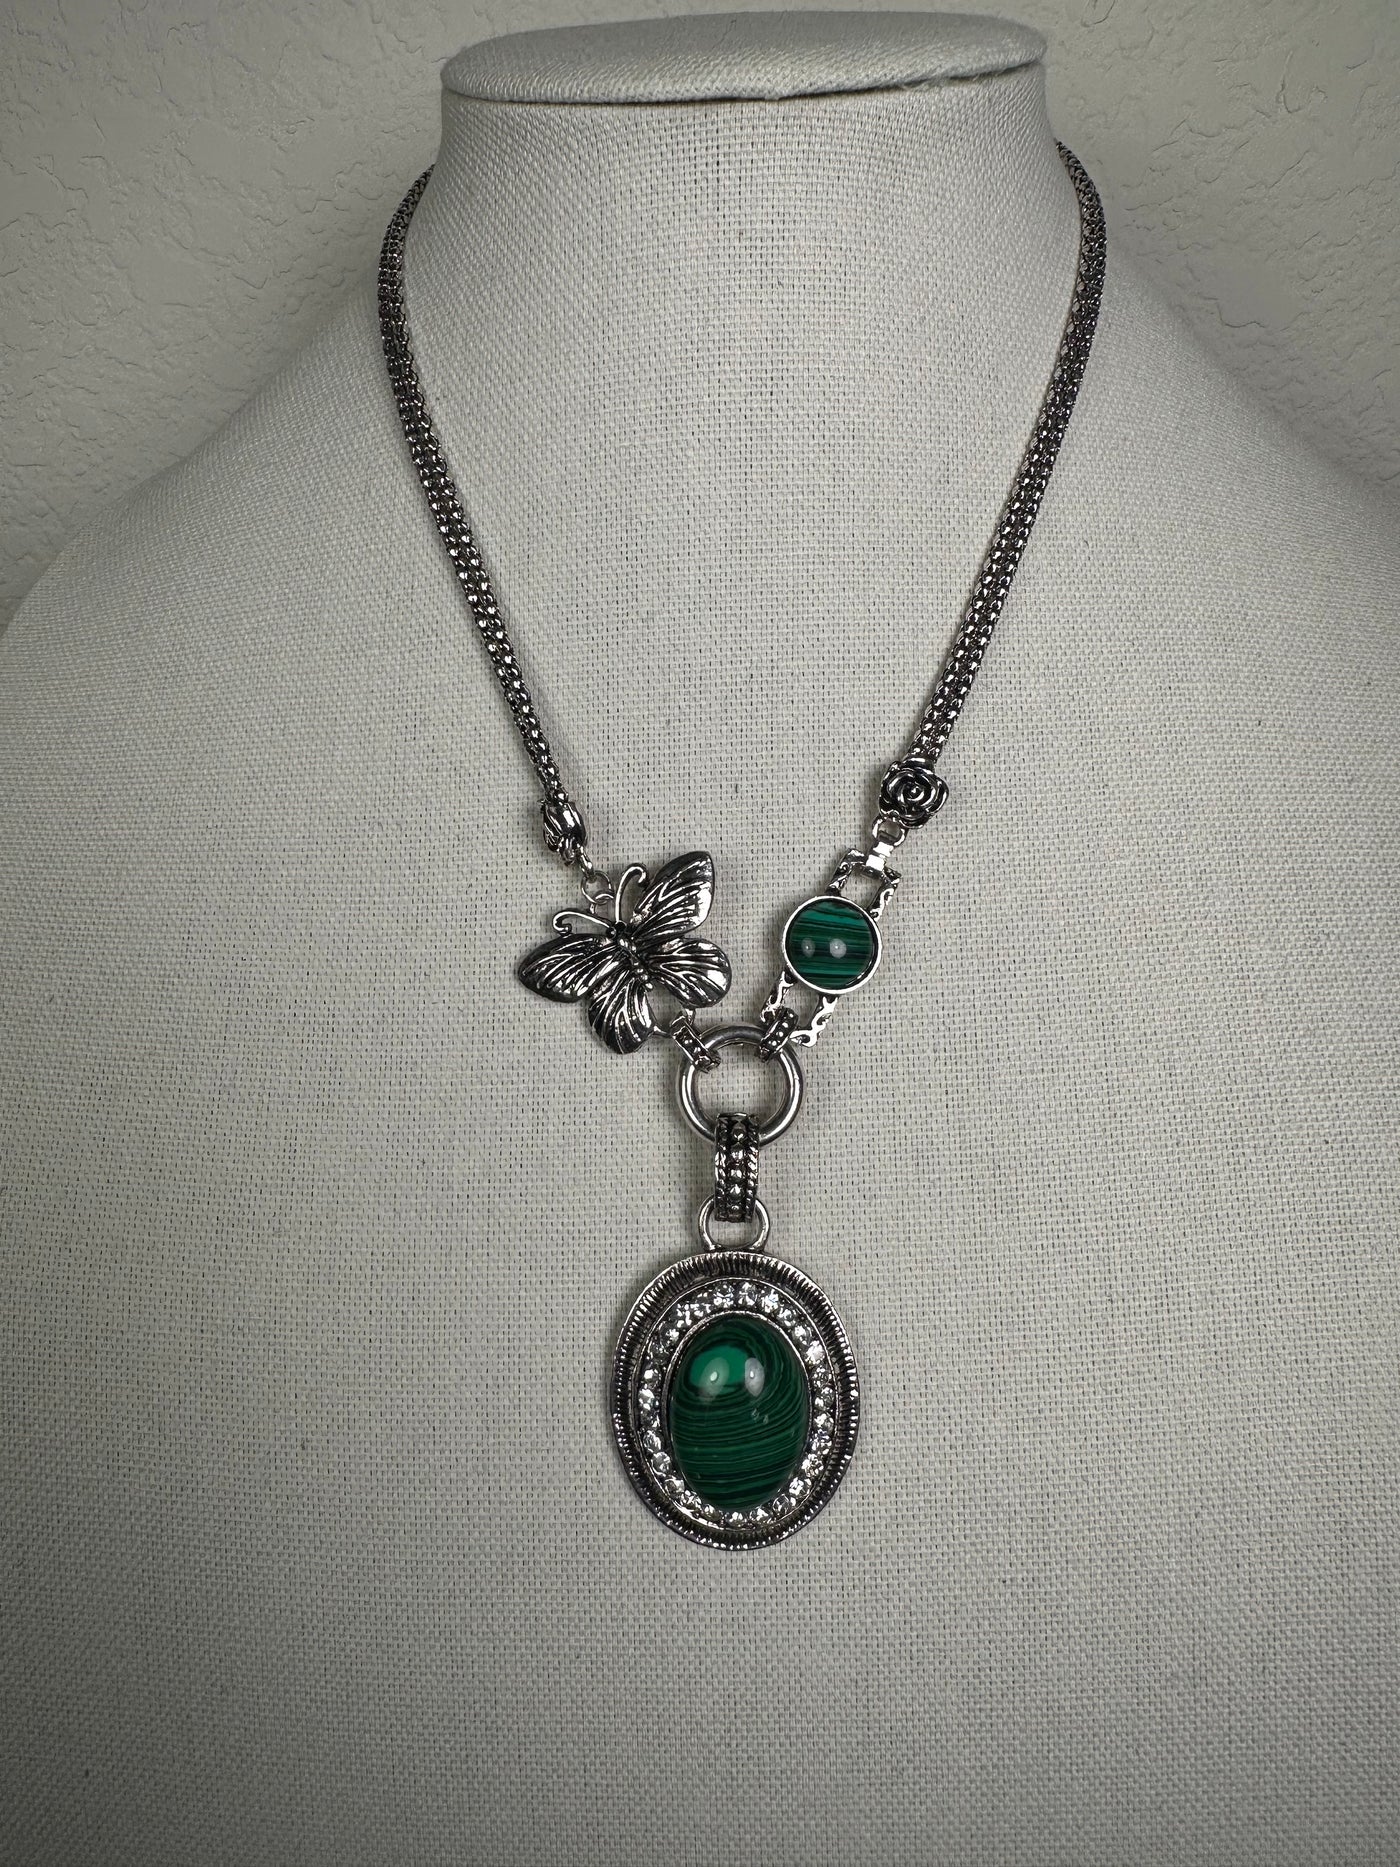 Silver Tone Necklace with an Oval Green Howlite Malachite Drop